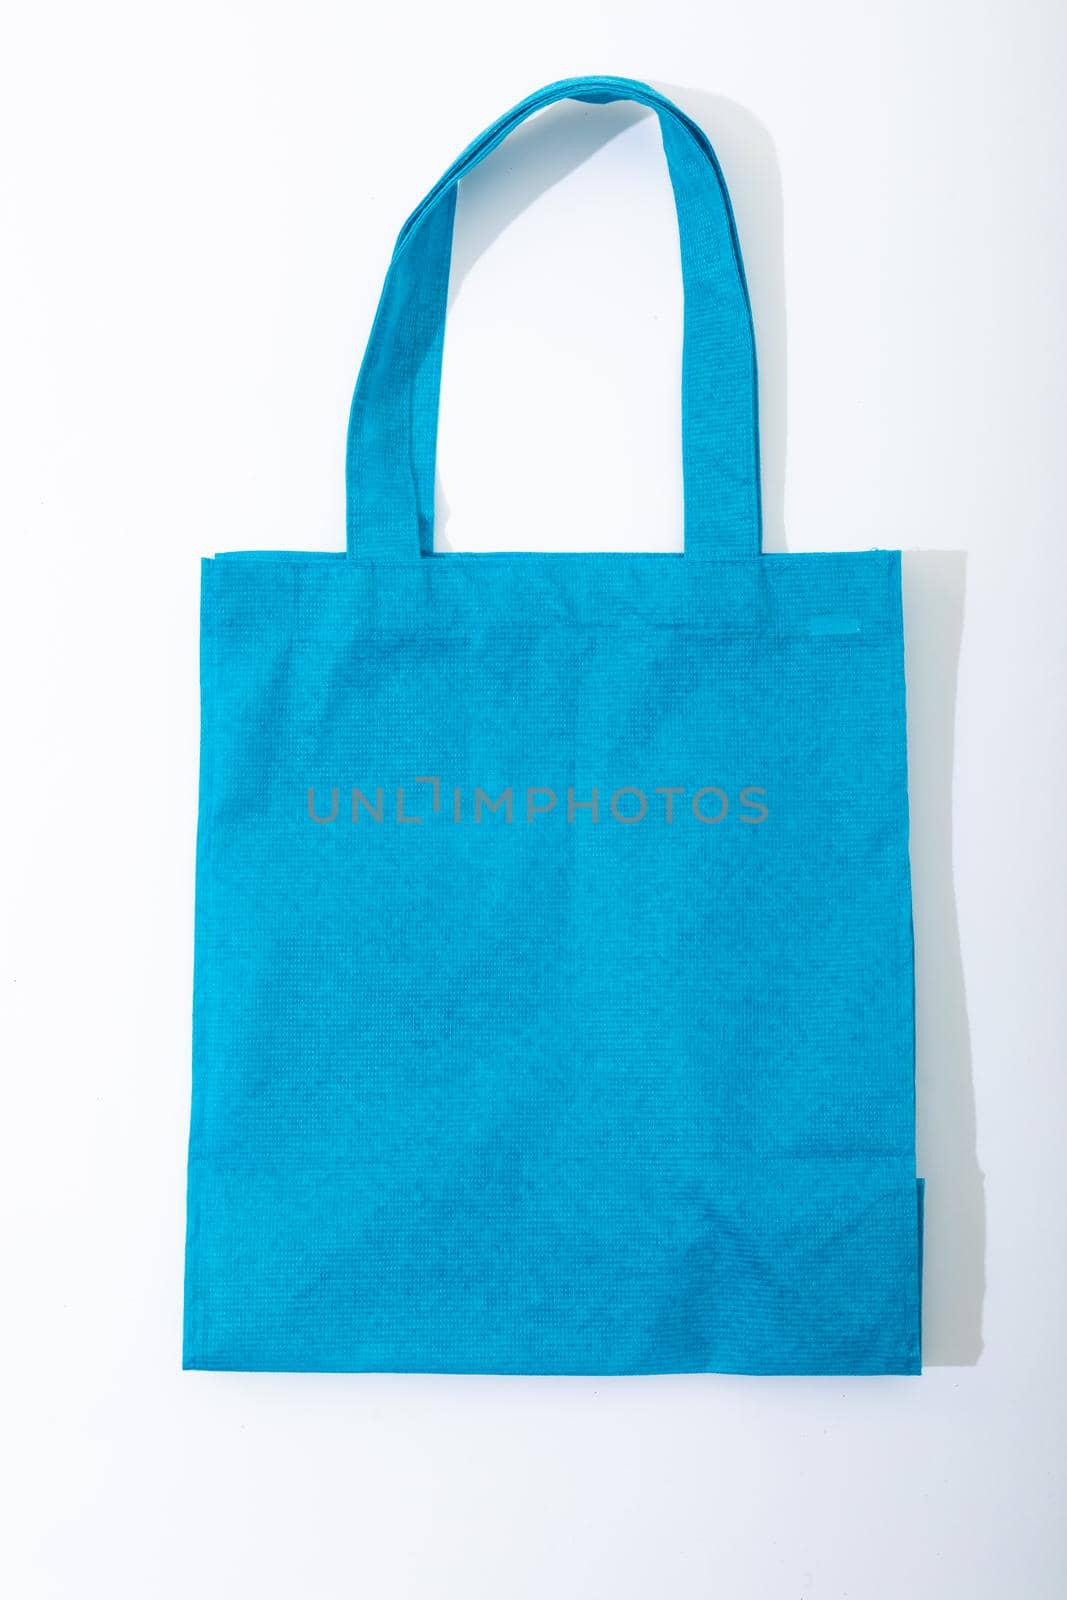 Composition of empty blue canvas shopping bag lying flat on white background. shopping and retail concept.